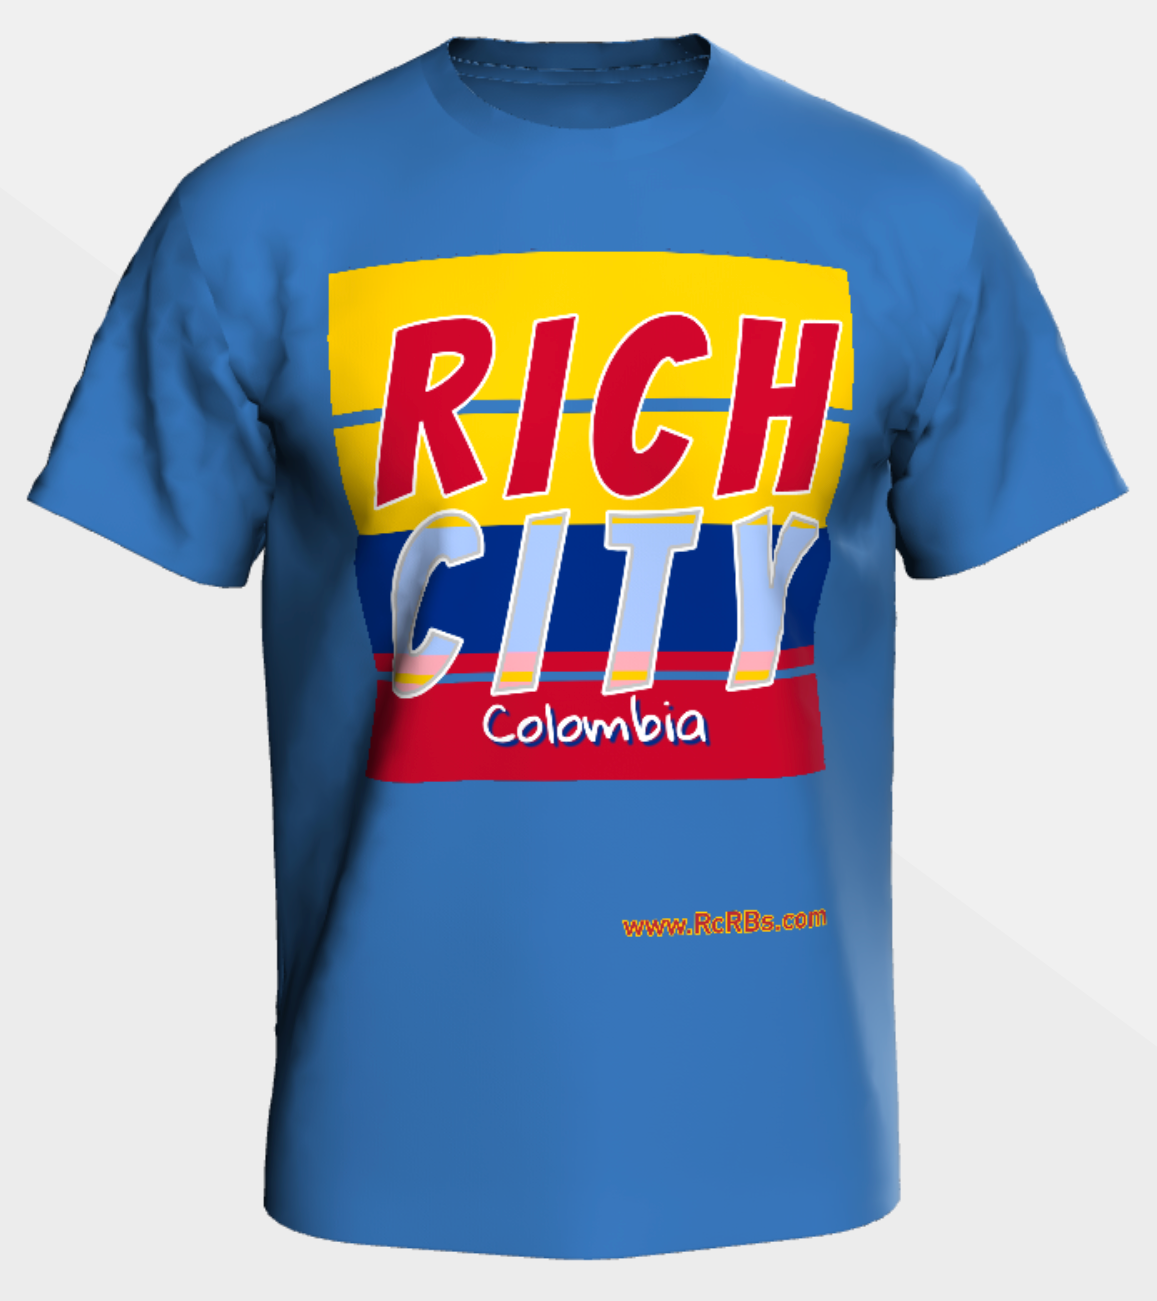 "Evry1's Brand" RichCity Rides Bike/Skate Cooperative -"Colombia"- Sustainable Clothing Collection